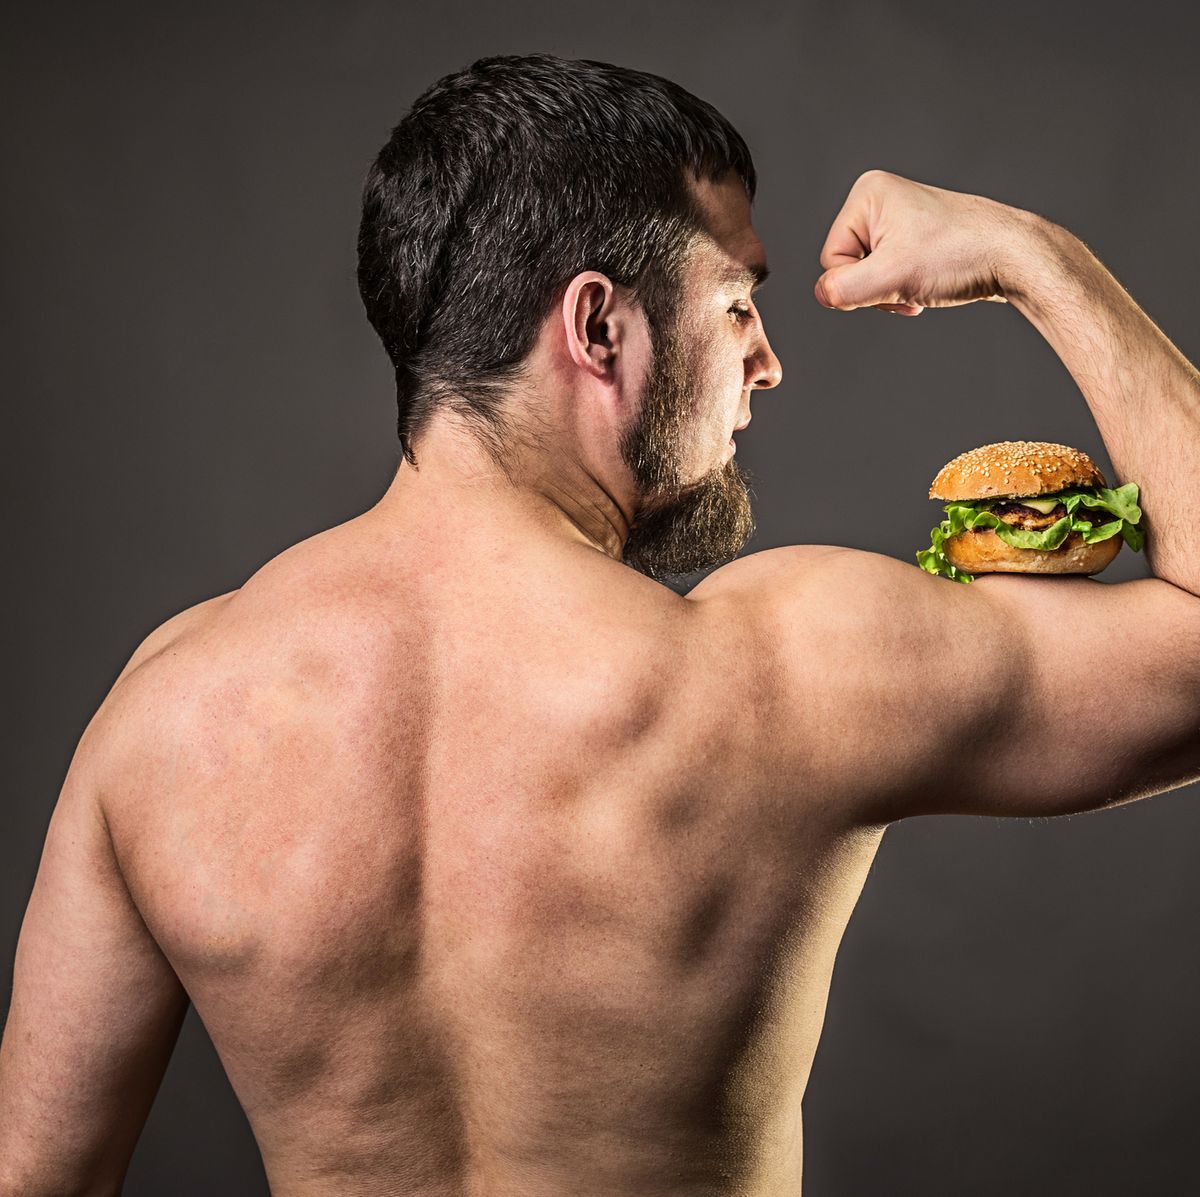 Does Bulking and Cutting Diet Increase Symptoms of Eating Disorders?